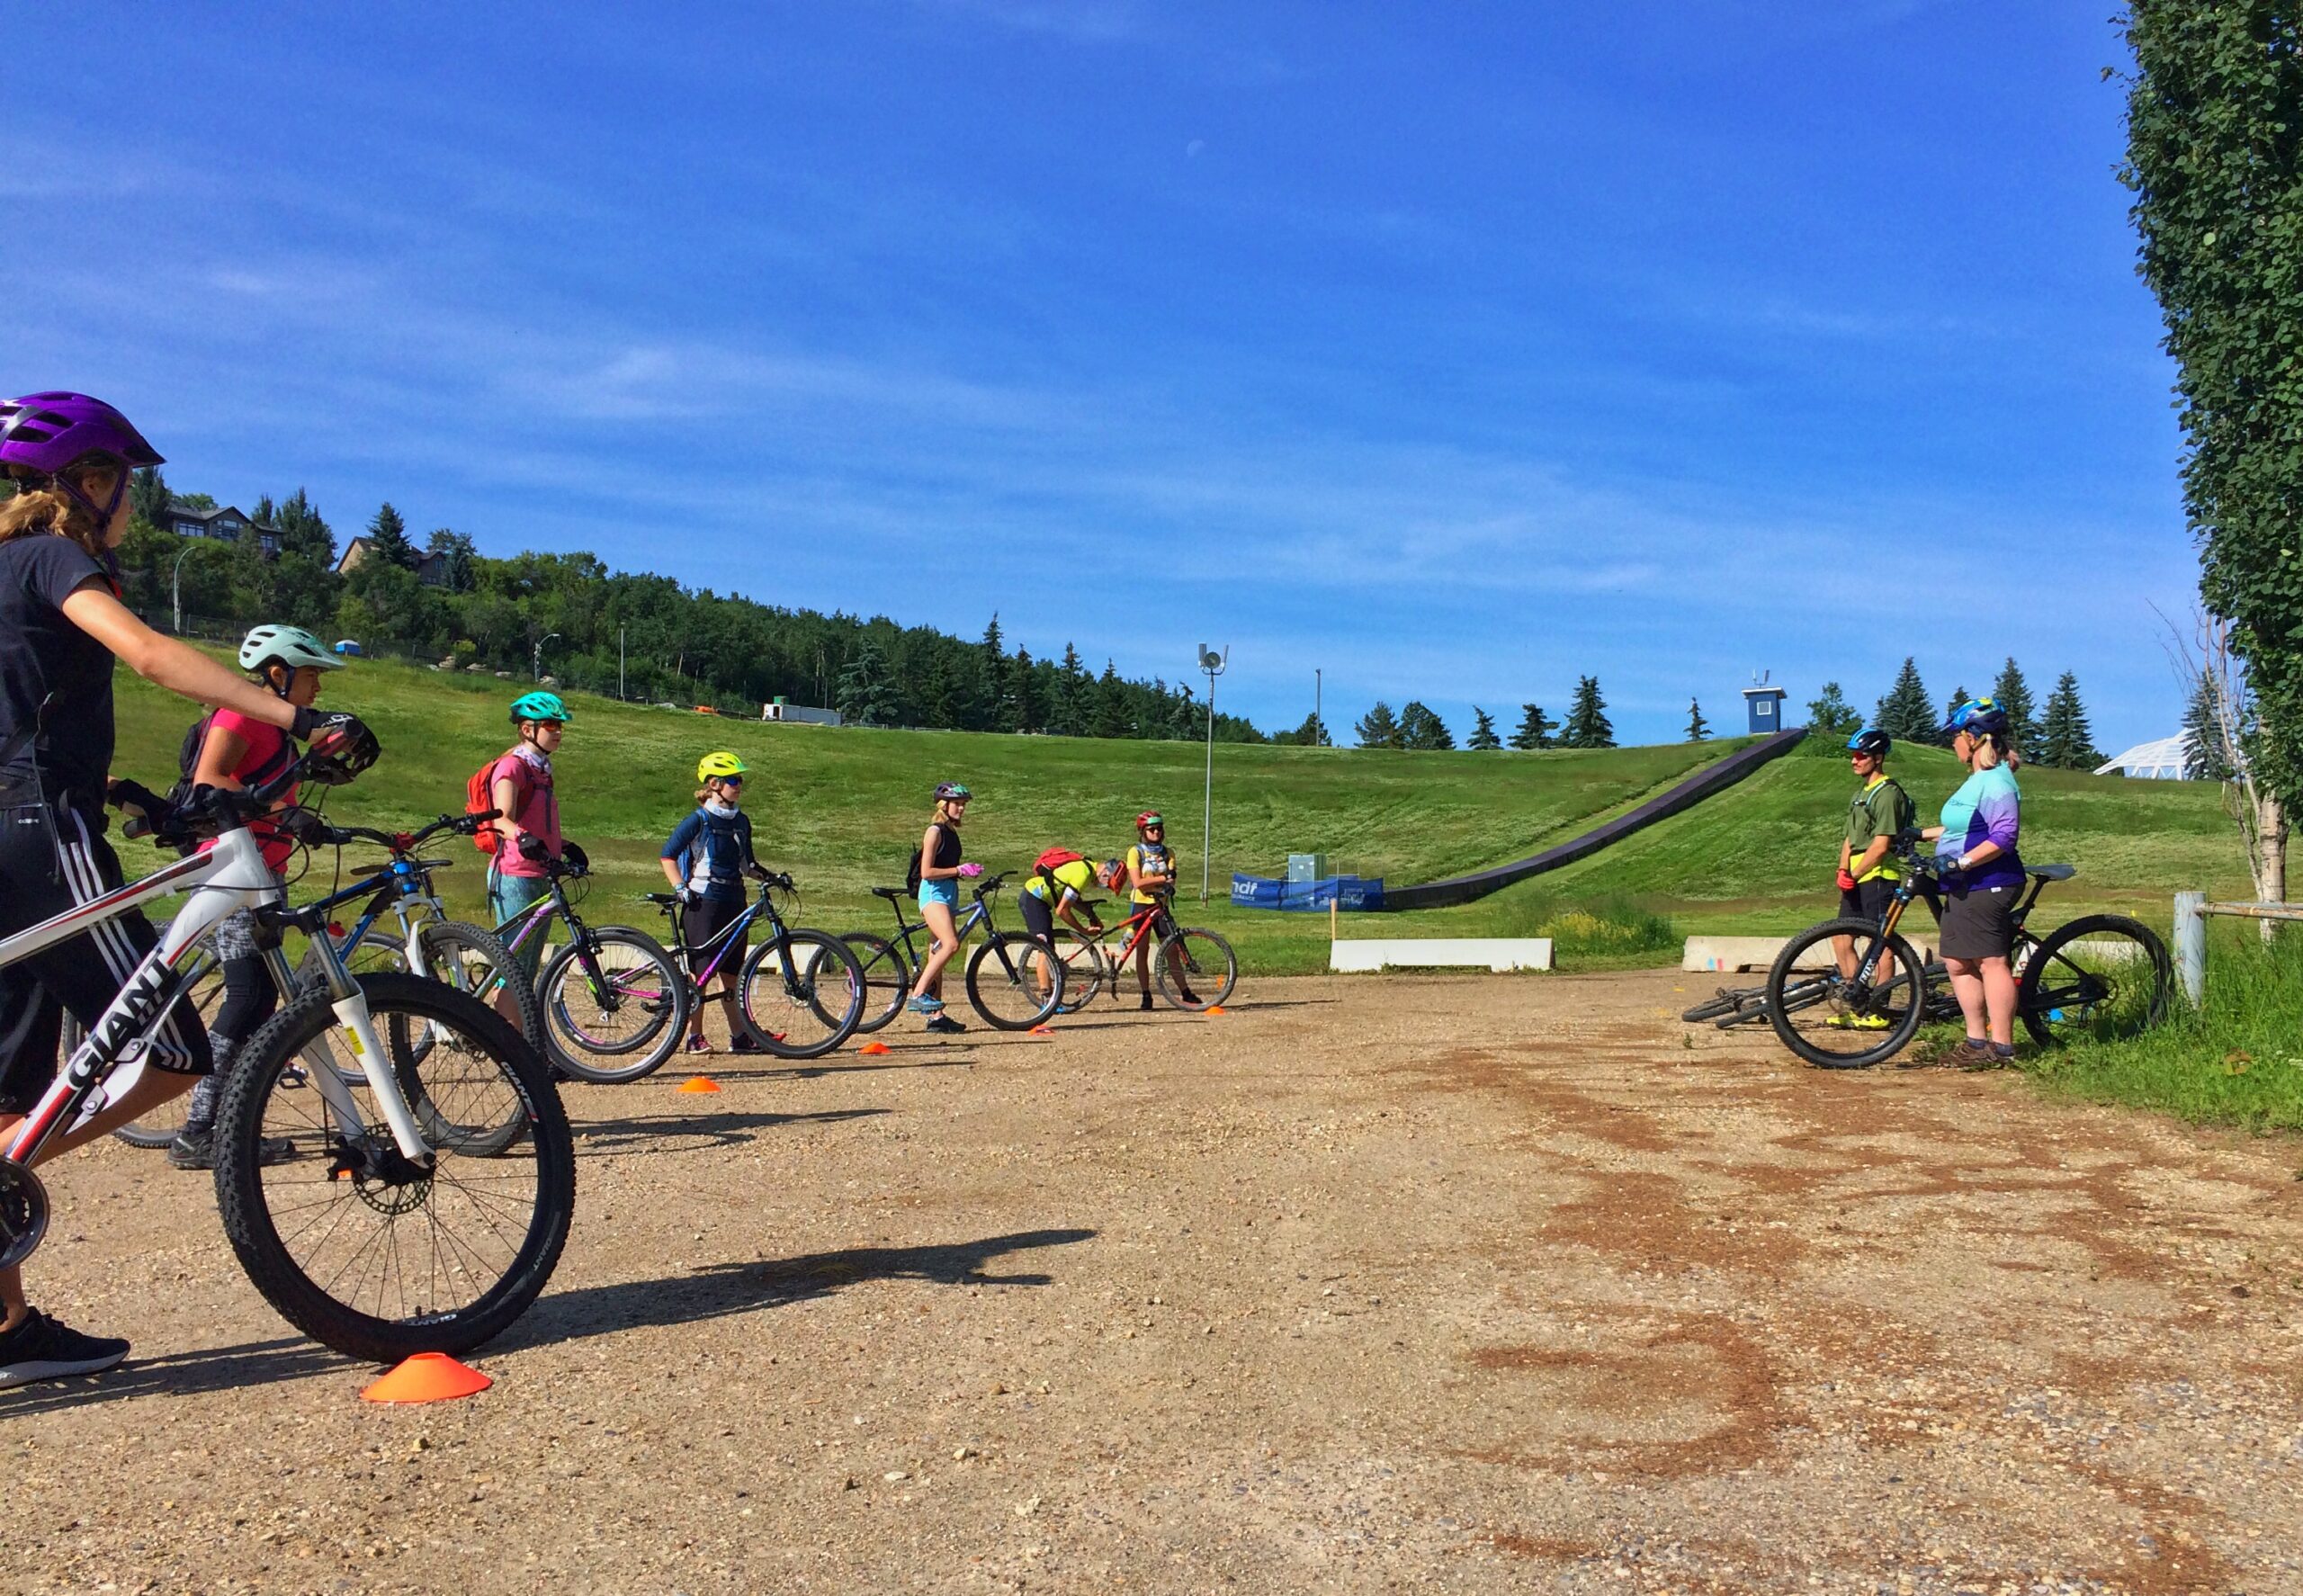 Trails and Tracks Summer Camps at the Edmonton Ski Club Family Fun